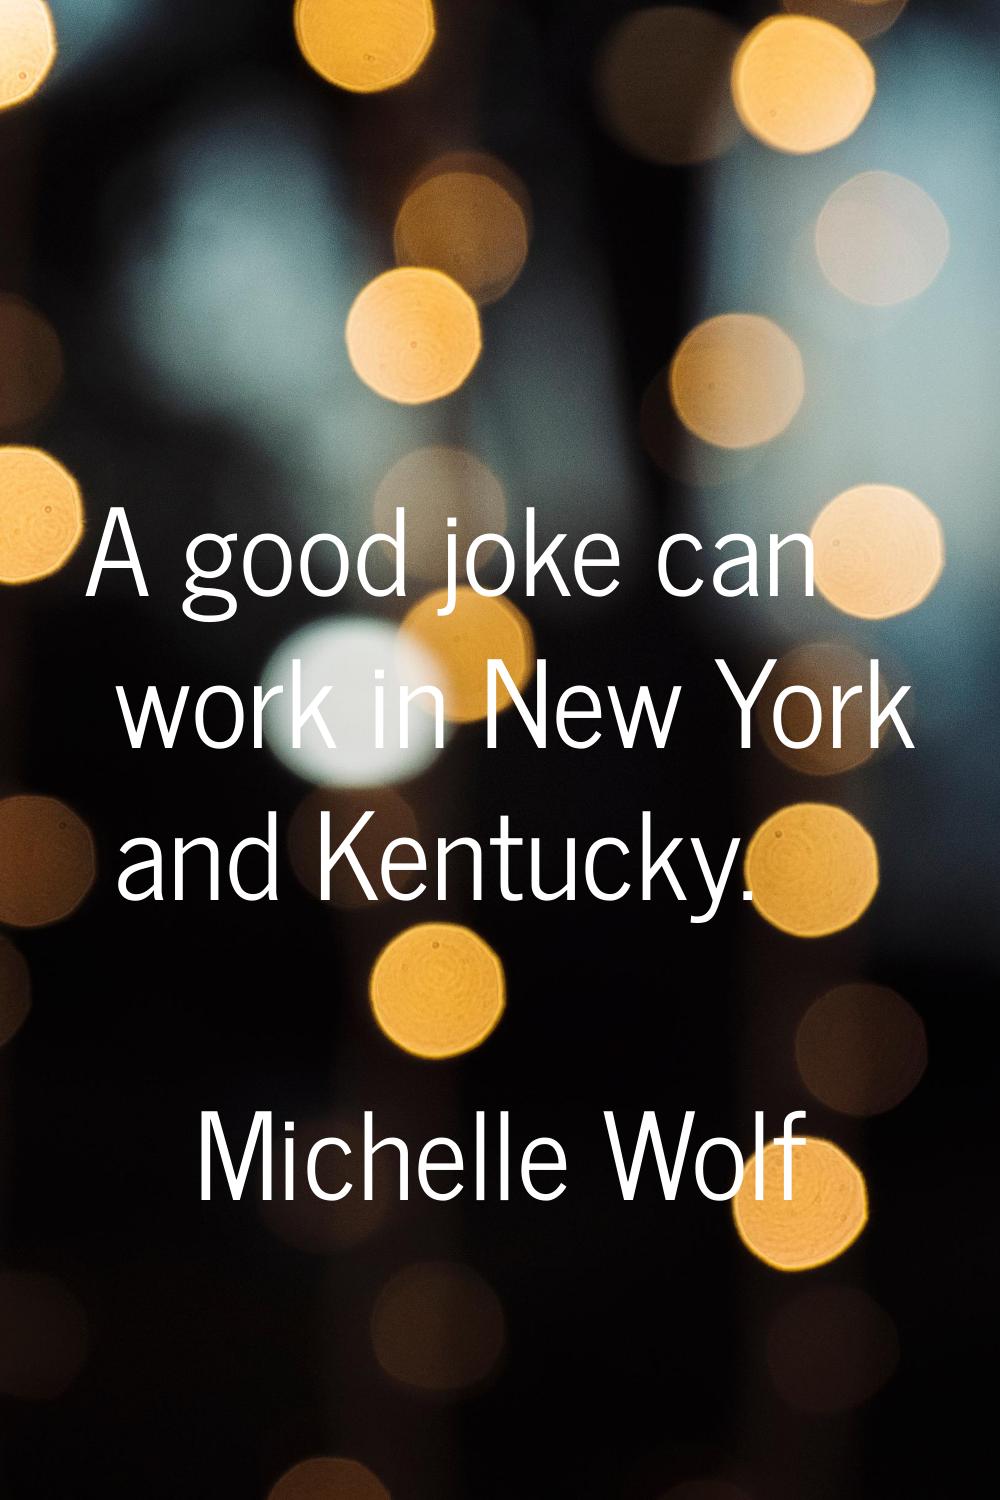 A good joke can work in New York and Kentucky.